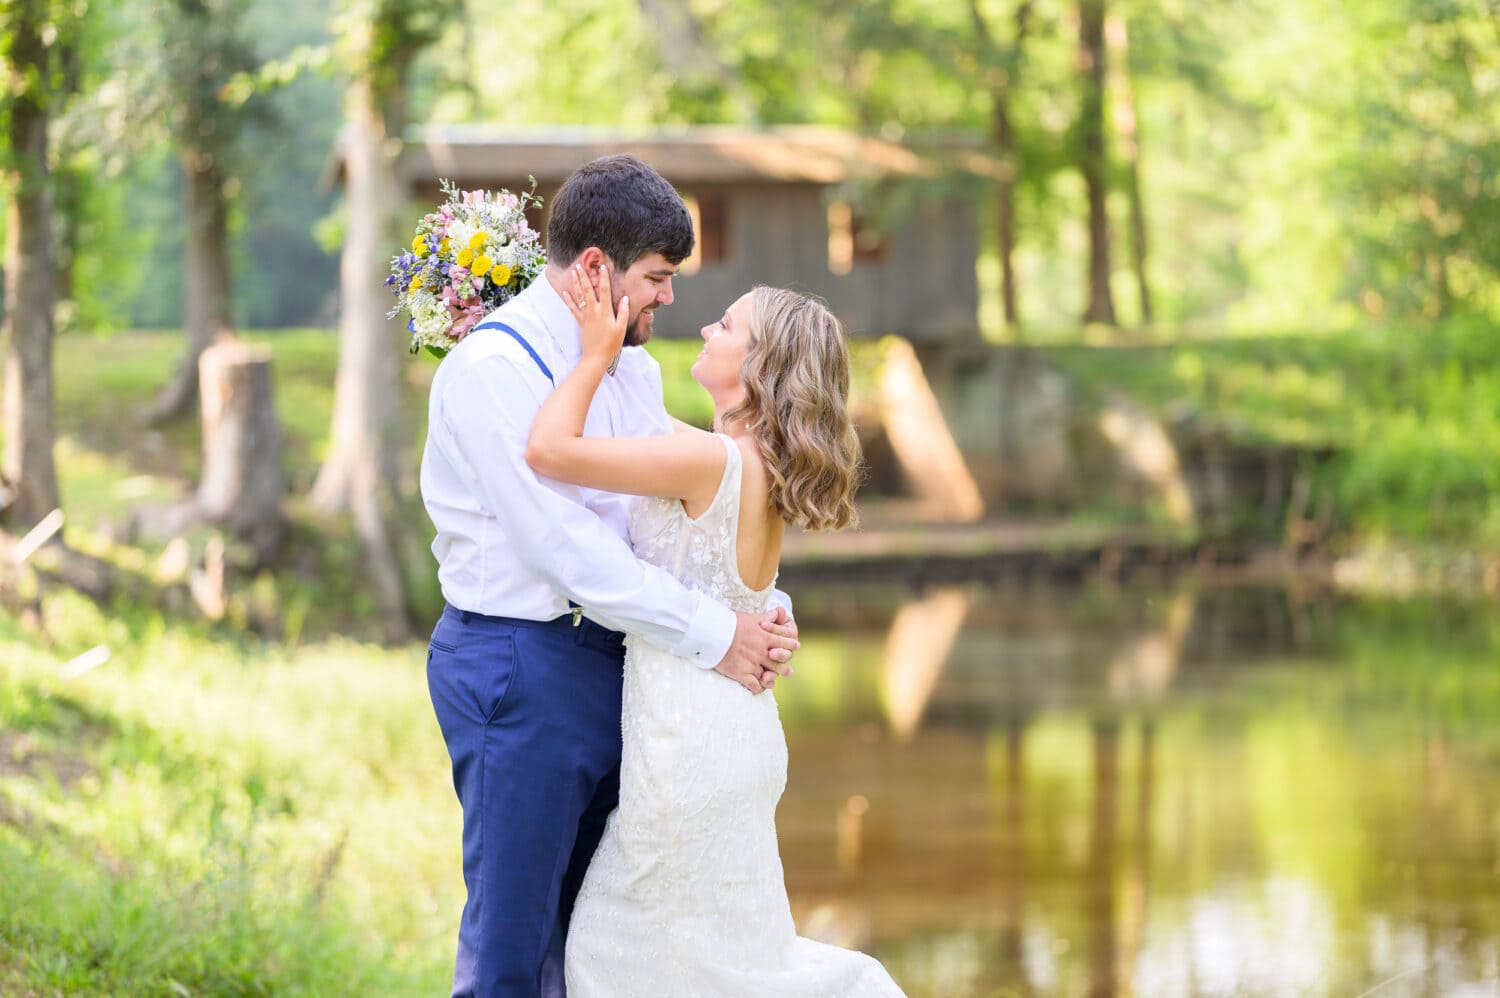 Love in front of the old bridge on the water - Pine Log Plantation